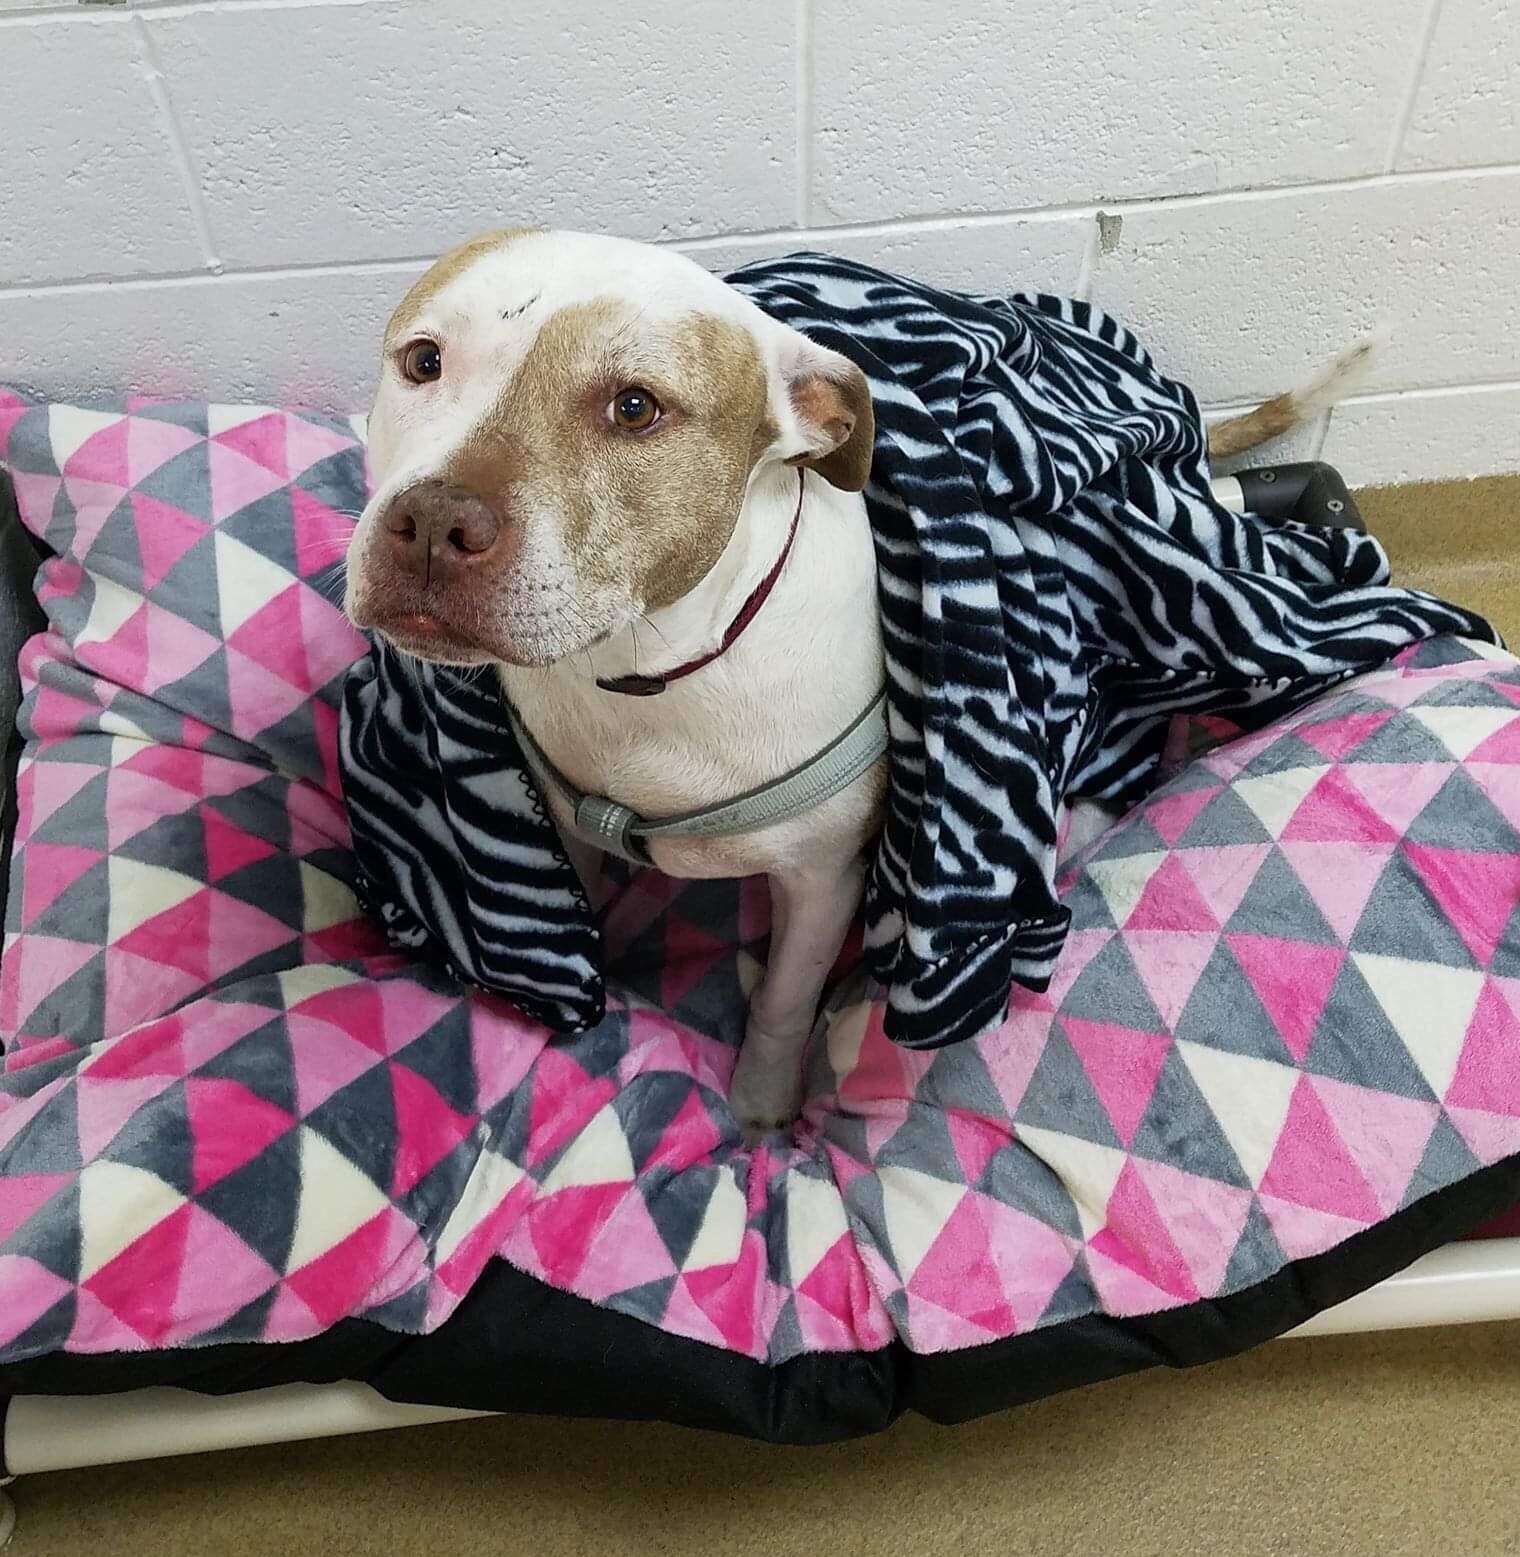 Pit bull on dog bed in shelter kennel